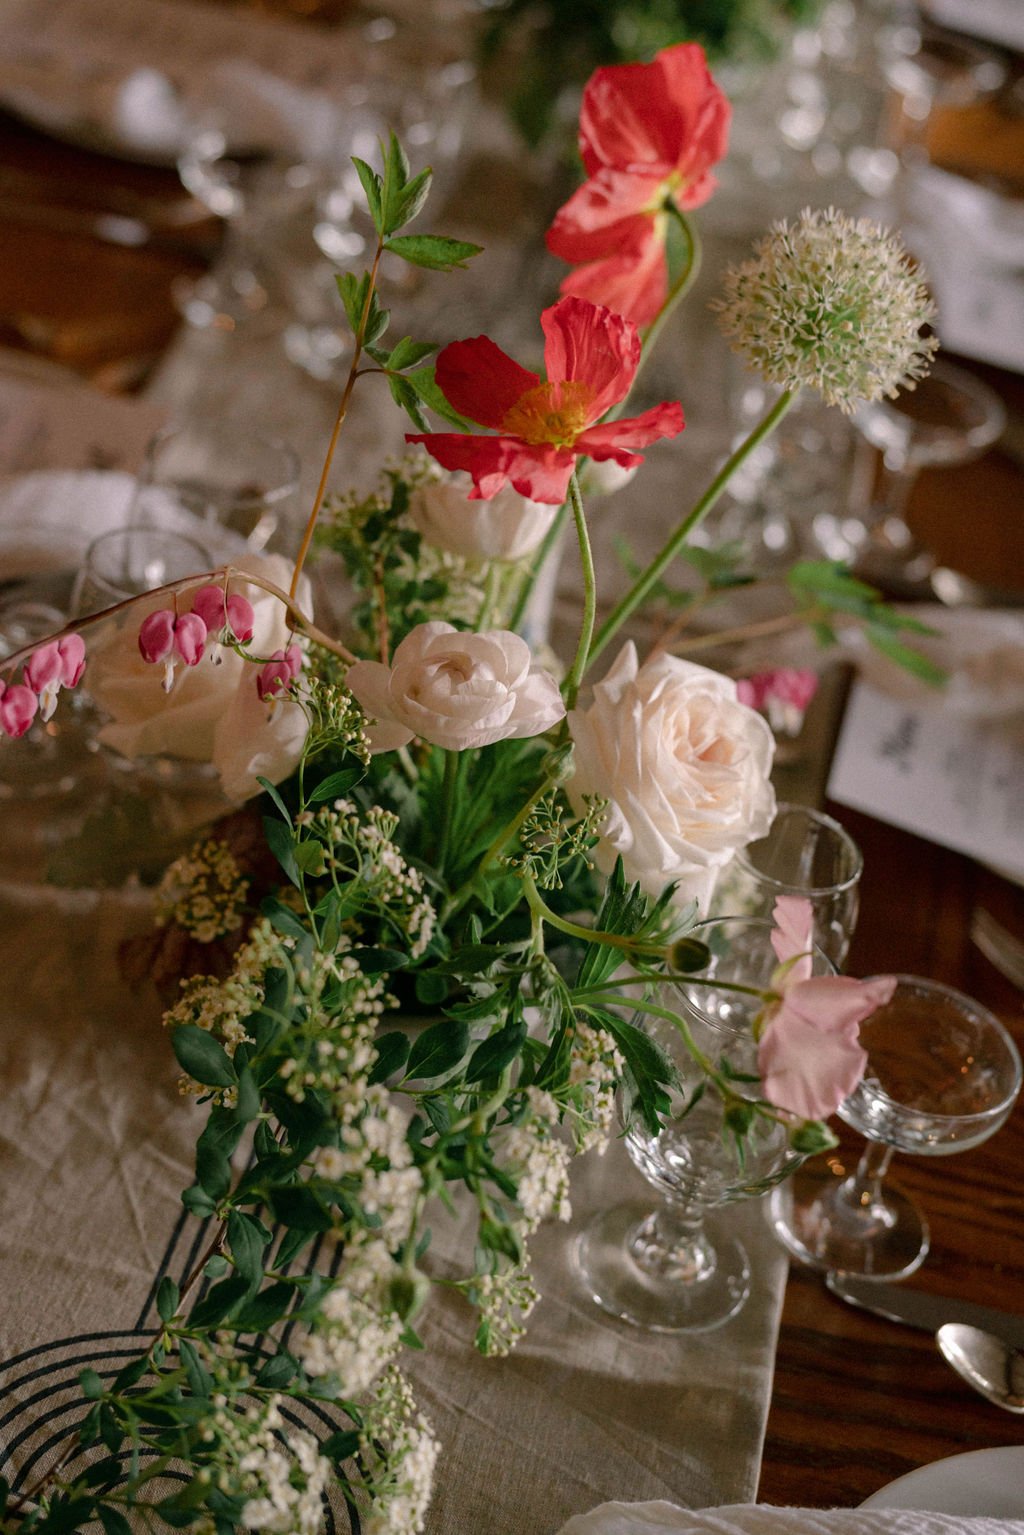 Maine Wedding Table Centerpiece with Poppy and Bleeding Heart